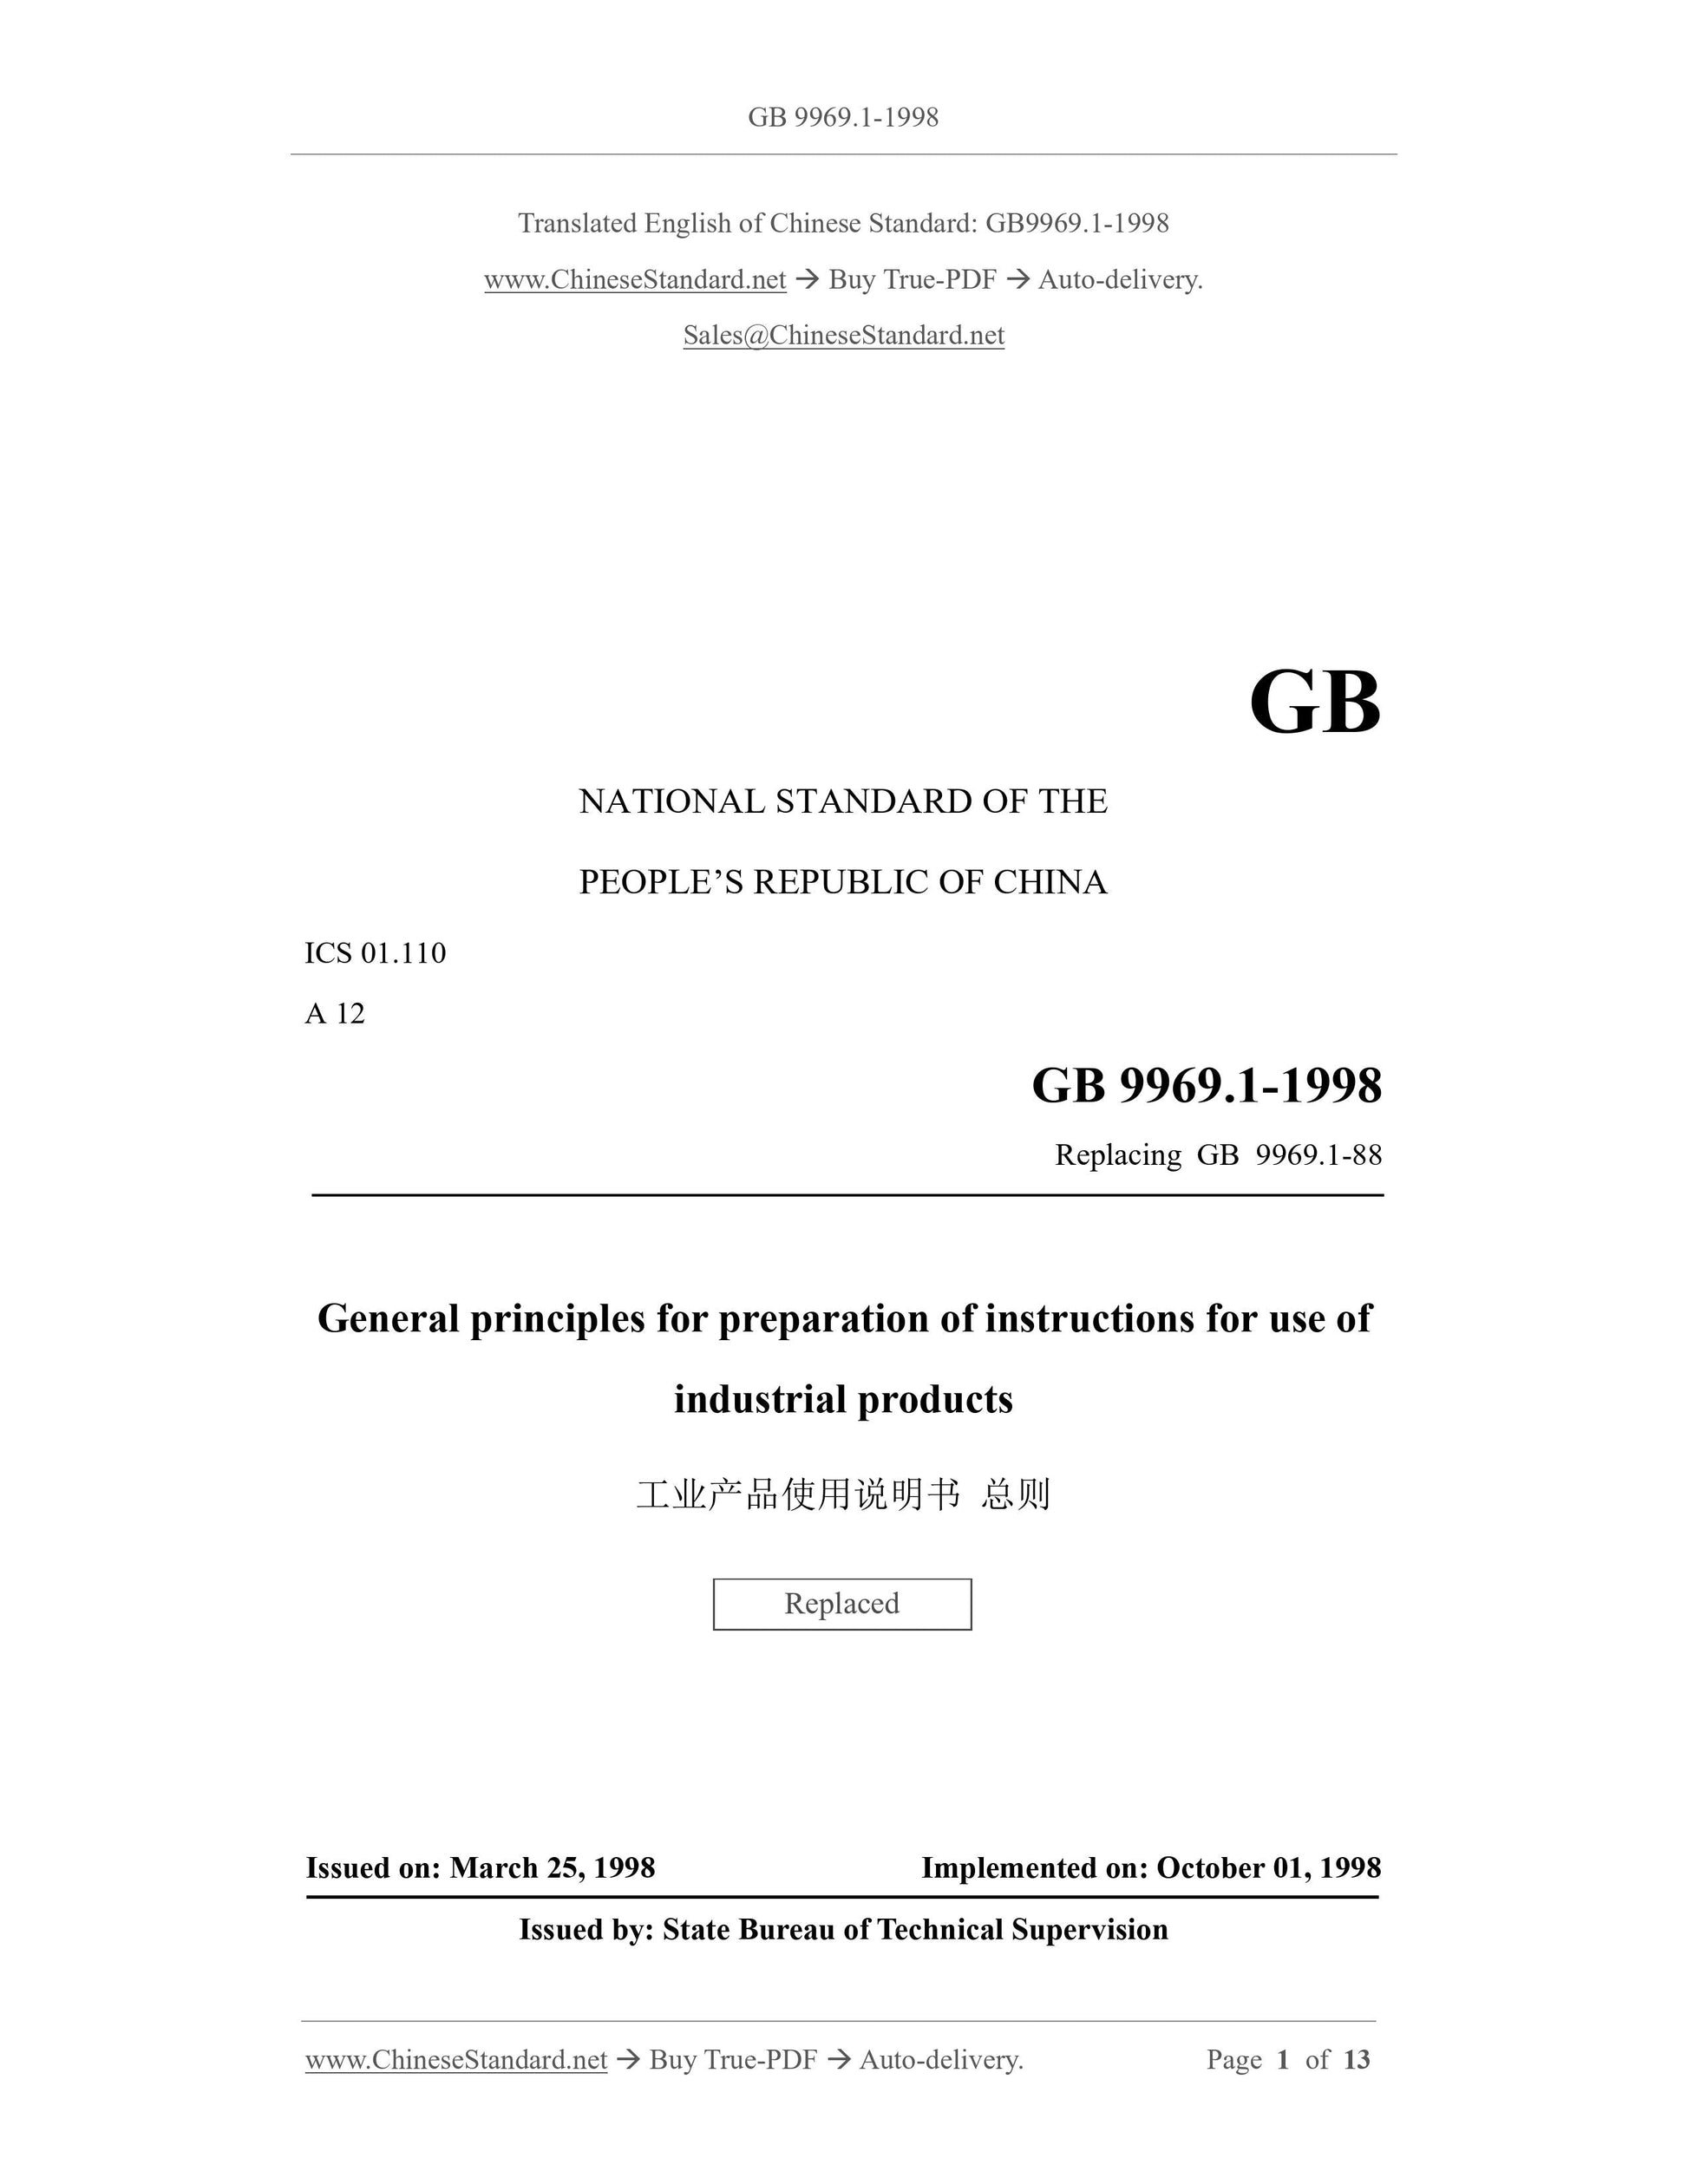 GB 9969.1-1998 Page 1